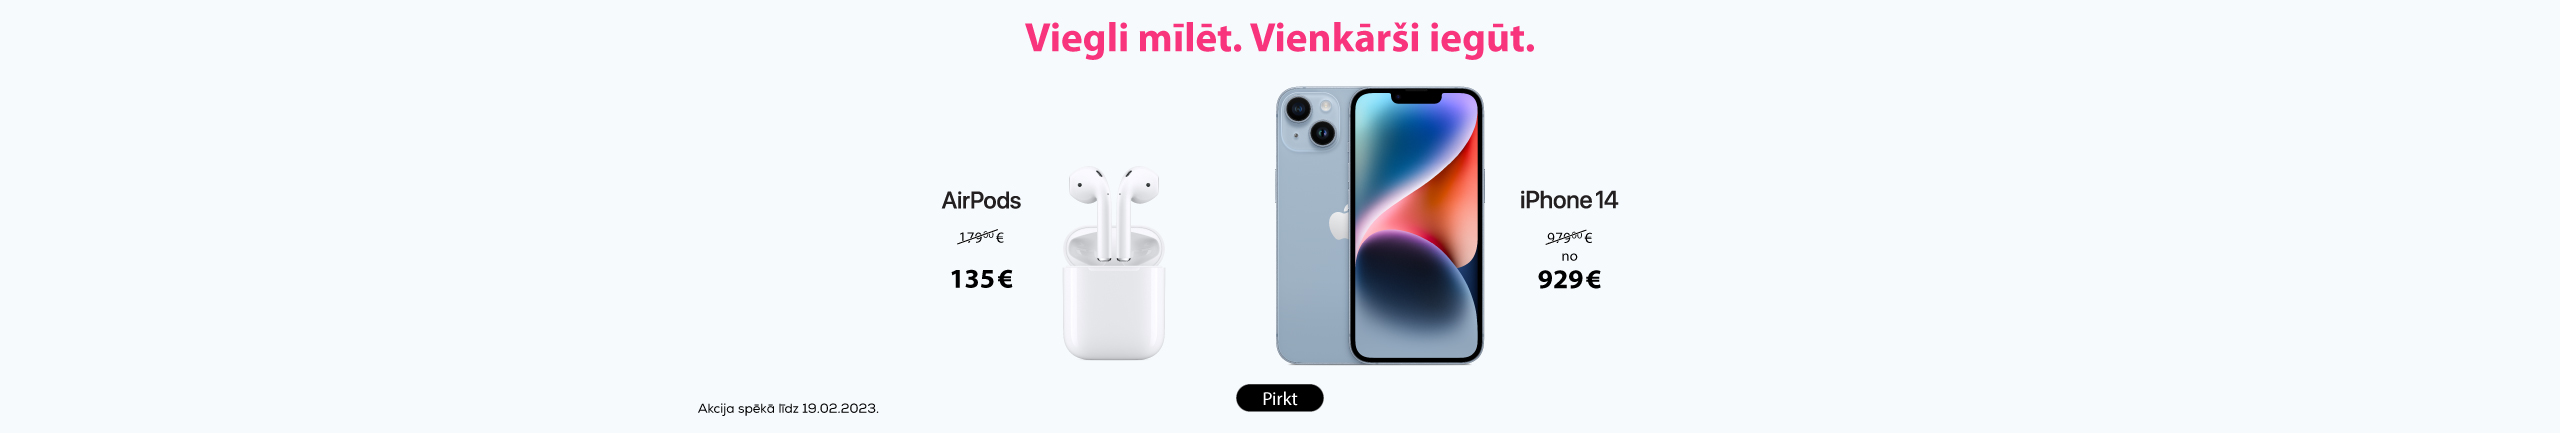 GR iPhone 14 airpods